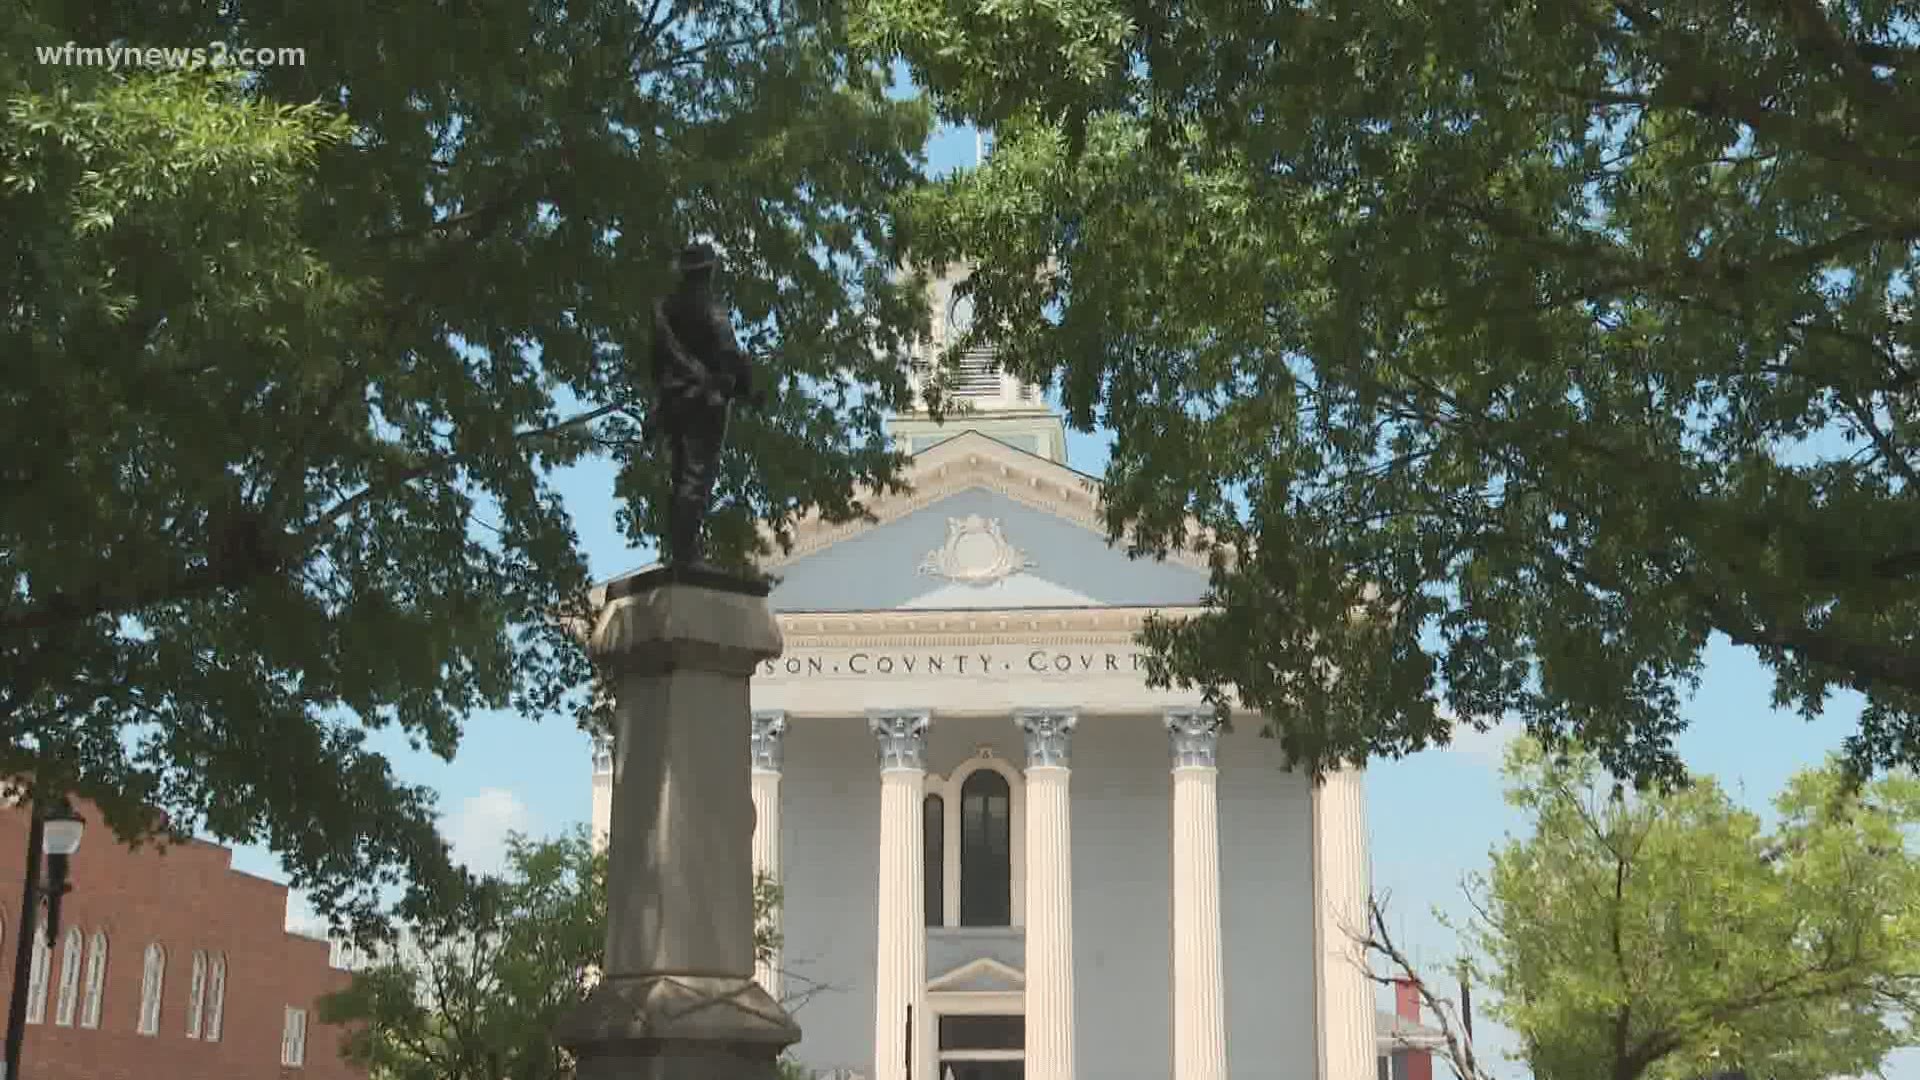 Lexington City Council passed a resolution in July asking the county commission to remove the statue. The issue wasn't on Tuesday night's agenda.